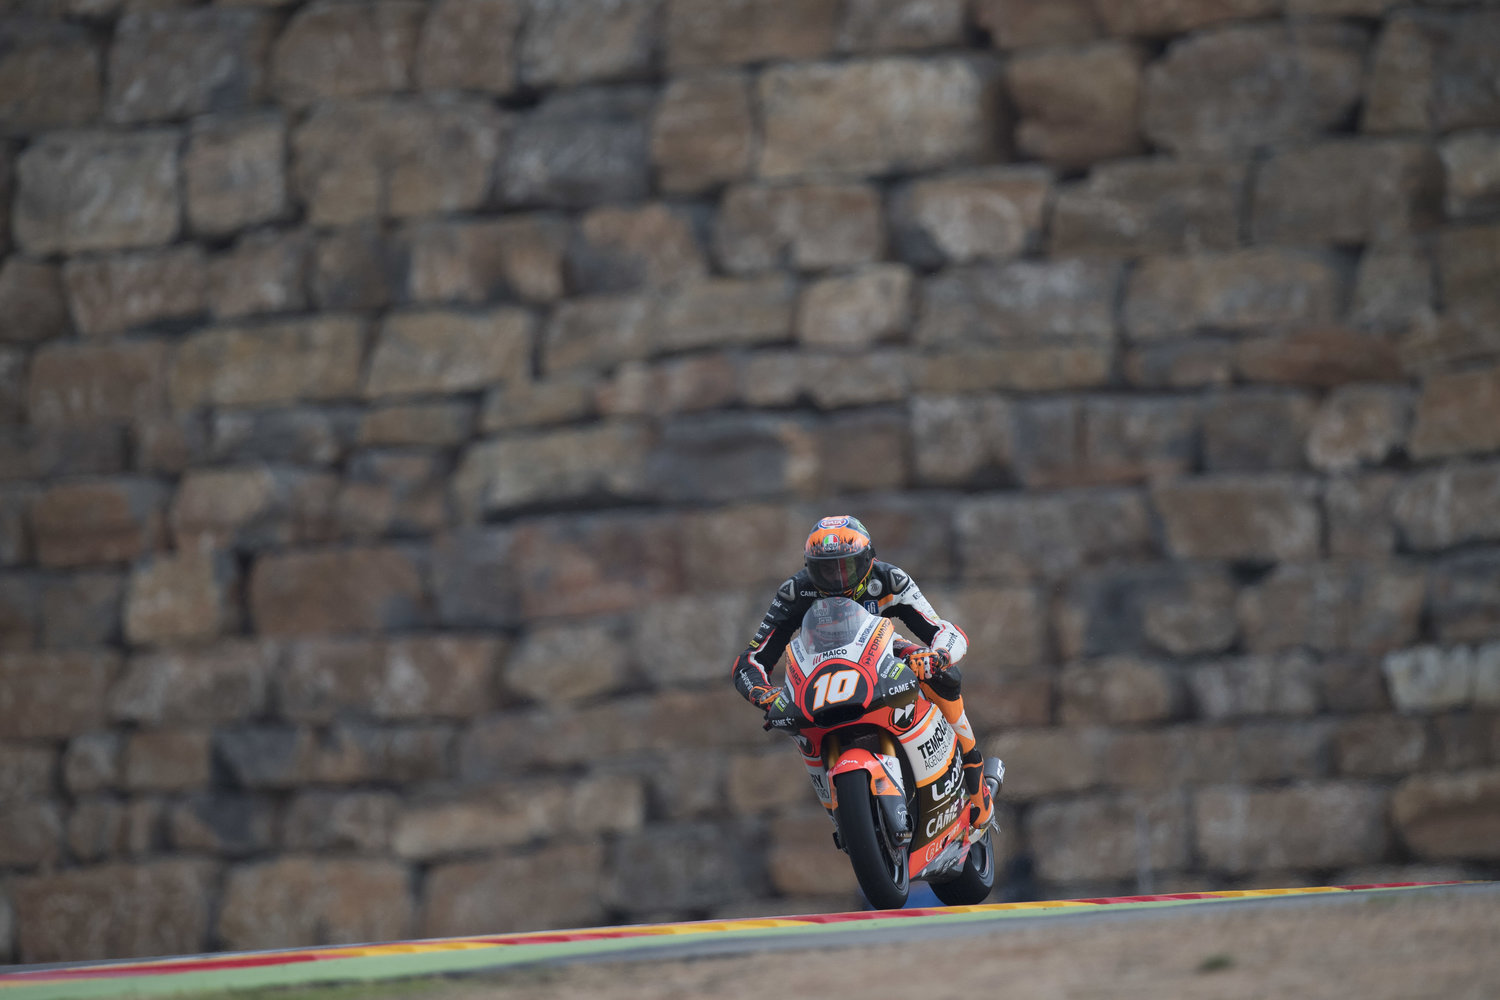 Forward Racing Team faces mixed conditions on day one in Aragon